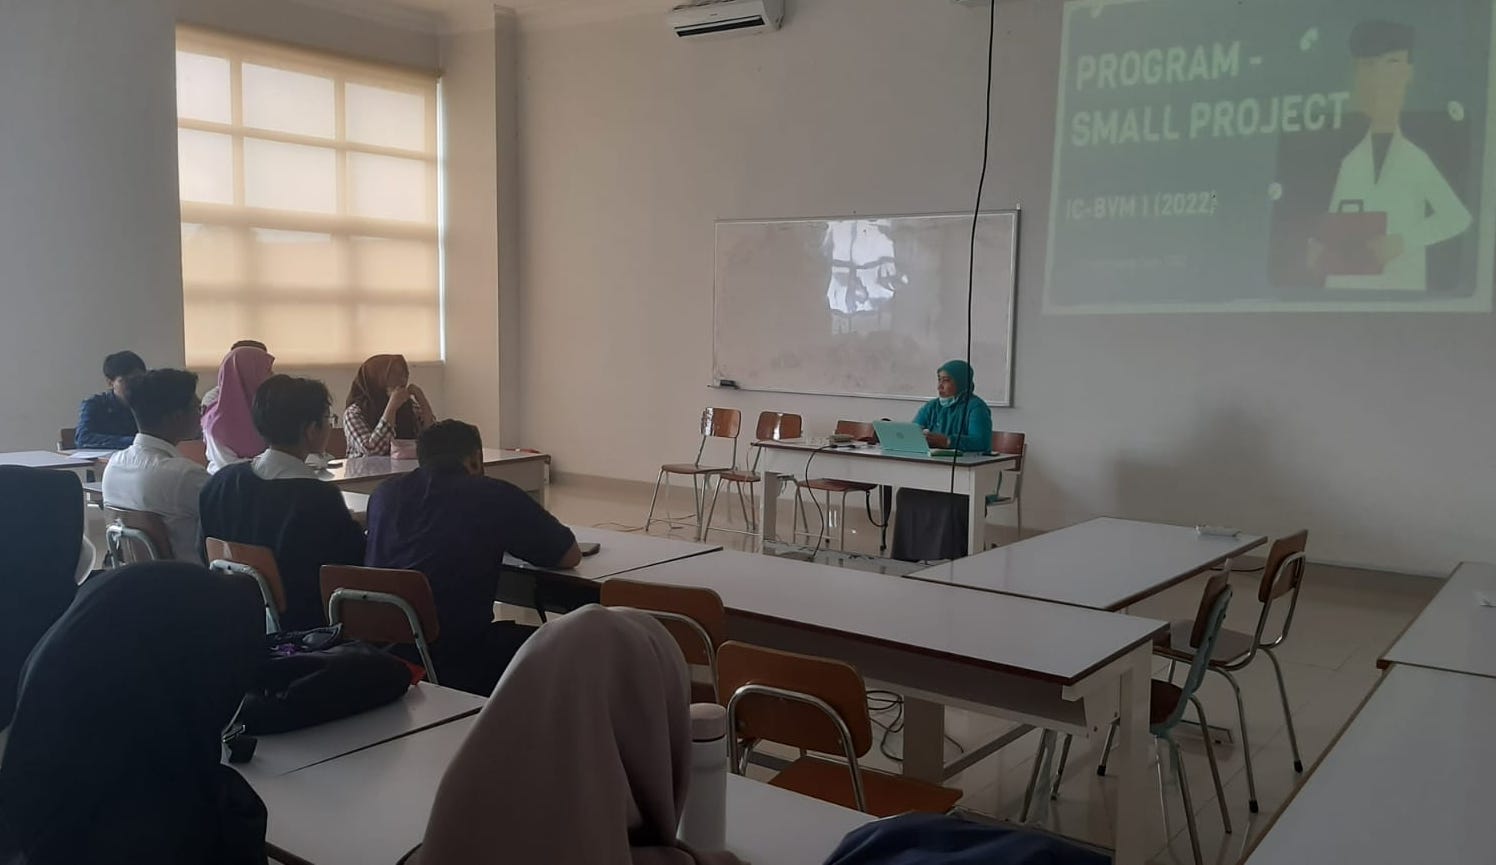 Socialization of Small Project Program to Develop the Potential of International Class Students of the Faculty of Veterinary Medicine Universitas Syiah Kuala. Monday, January 30, 2023.